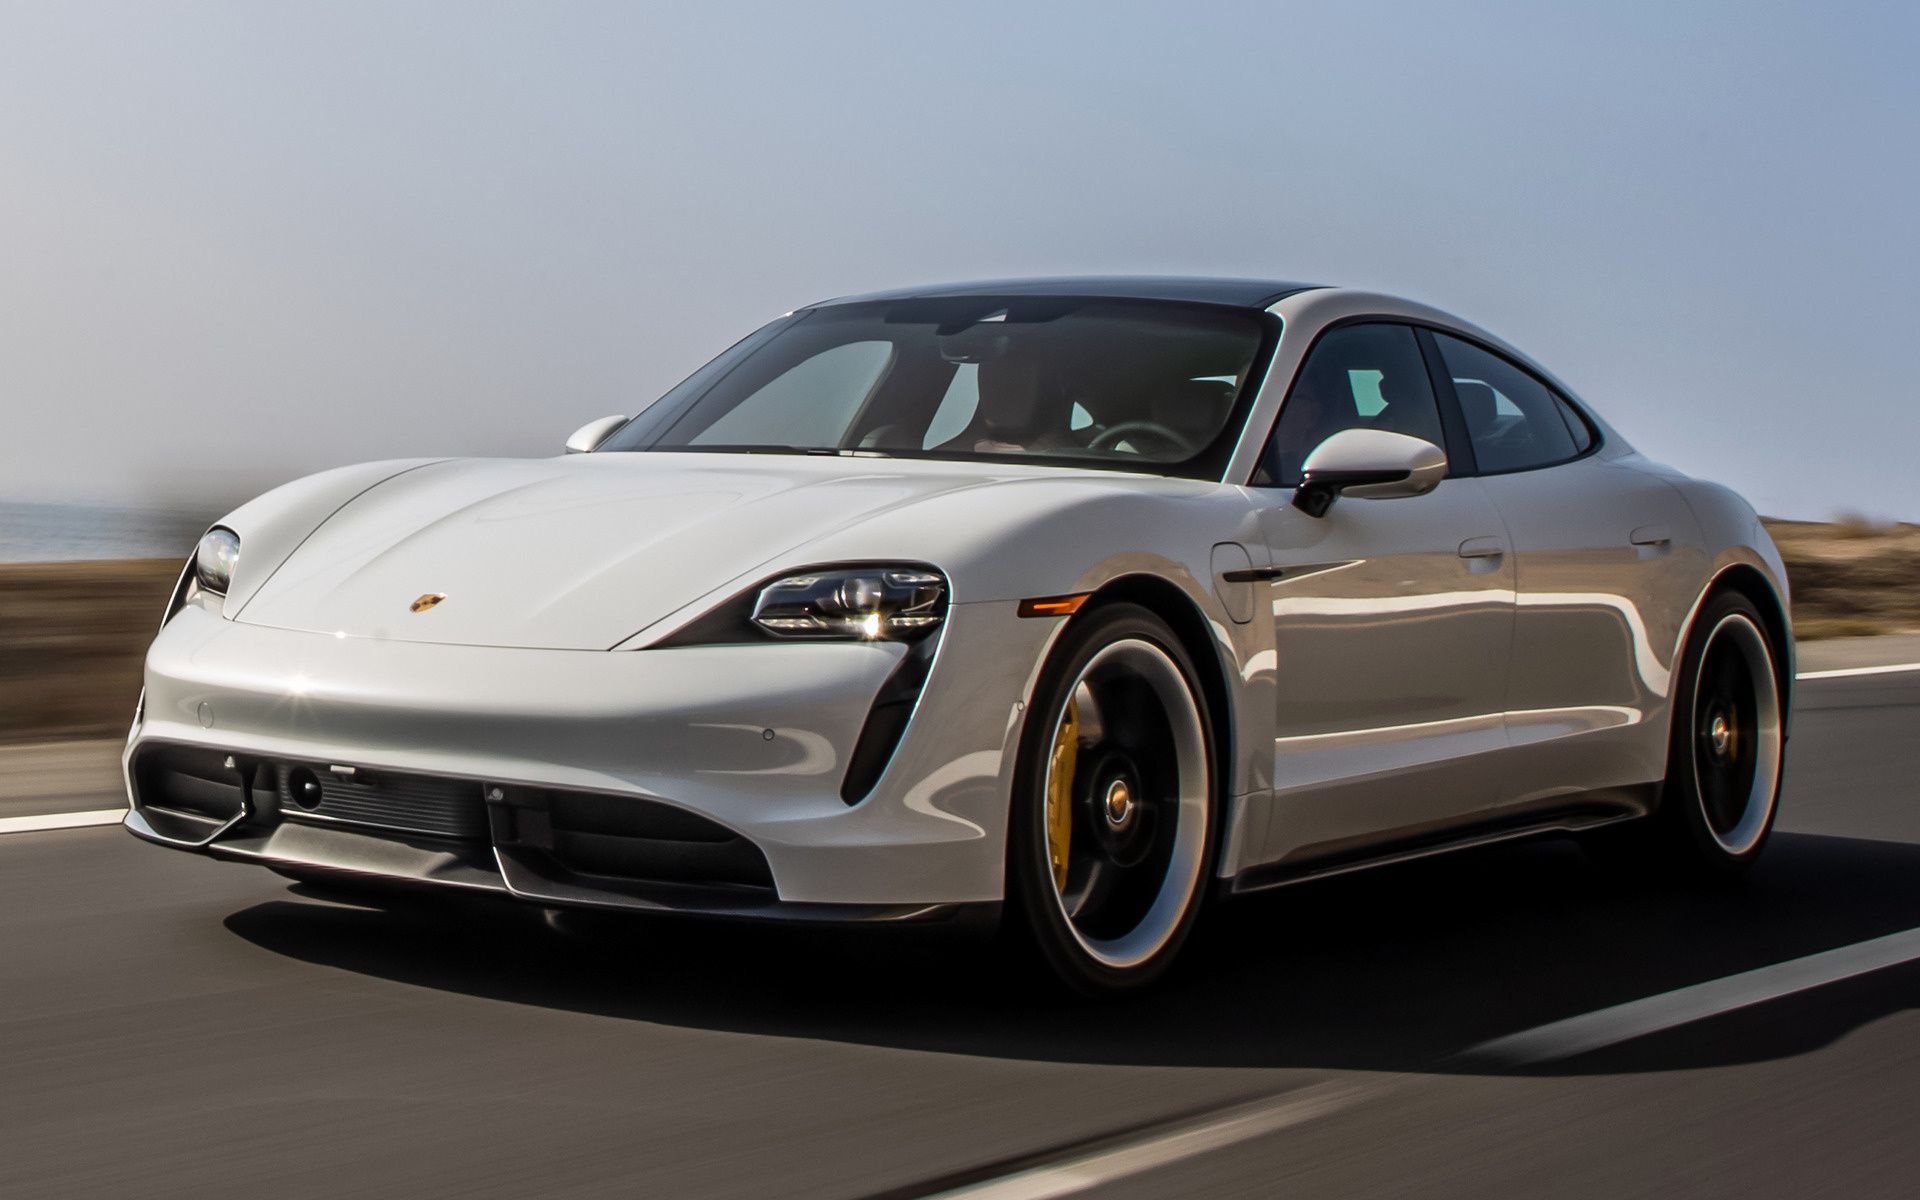 Porsche Taycan Turbo S (US) and HD Image. Car